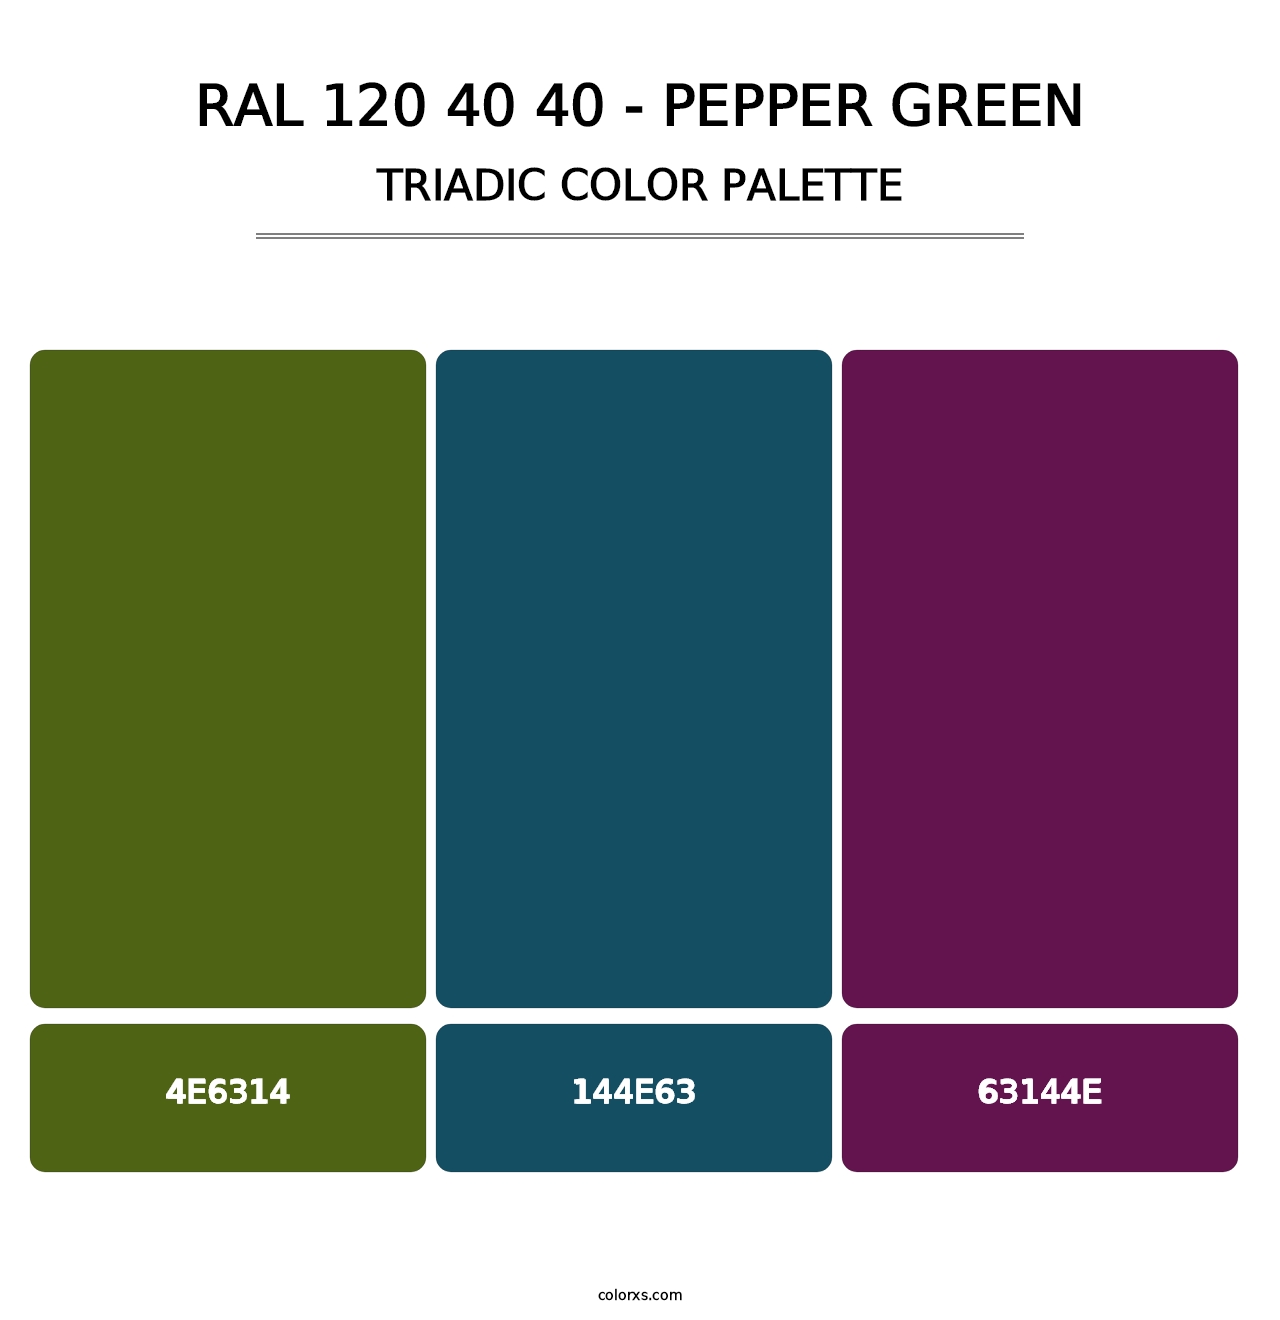 RAL 120 40 40 - Pepper Green - Triadic Color Palette